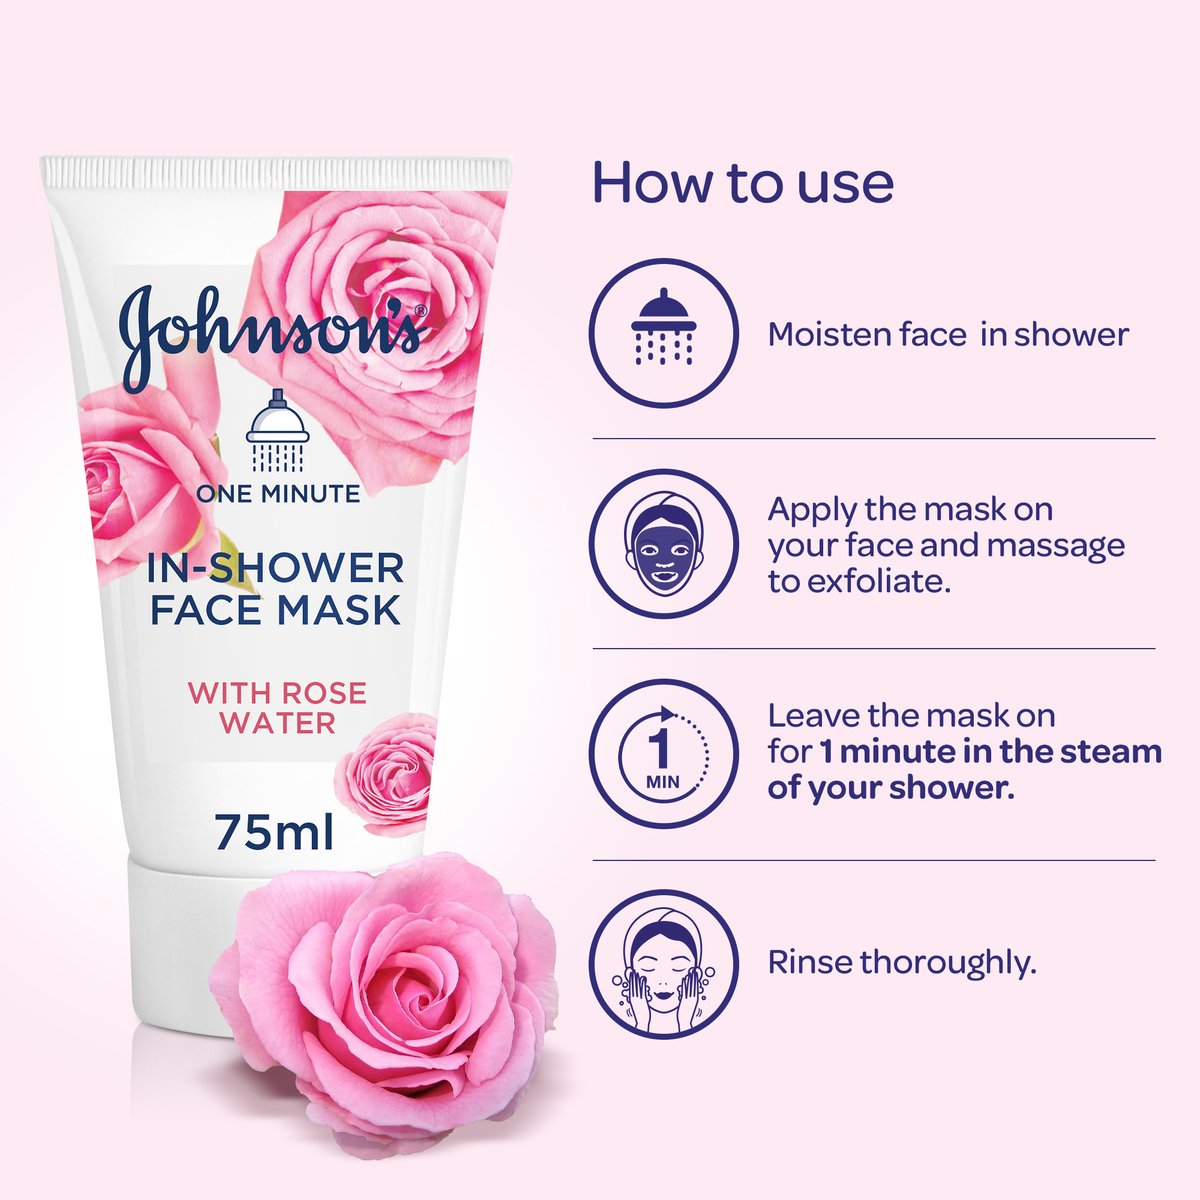 Johnson's Facial Mask 1 Minute In-Shower Face Mask with Rose Water 75 ml